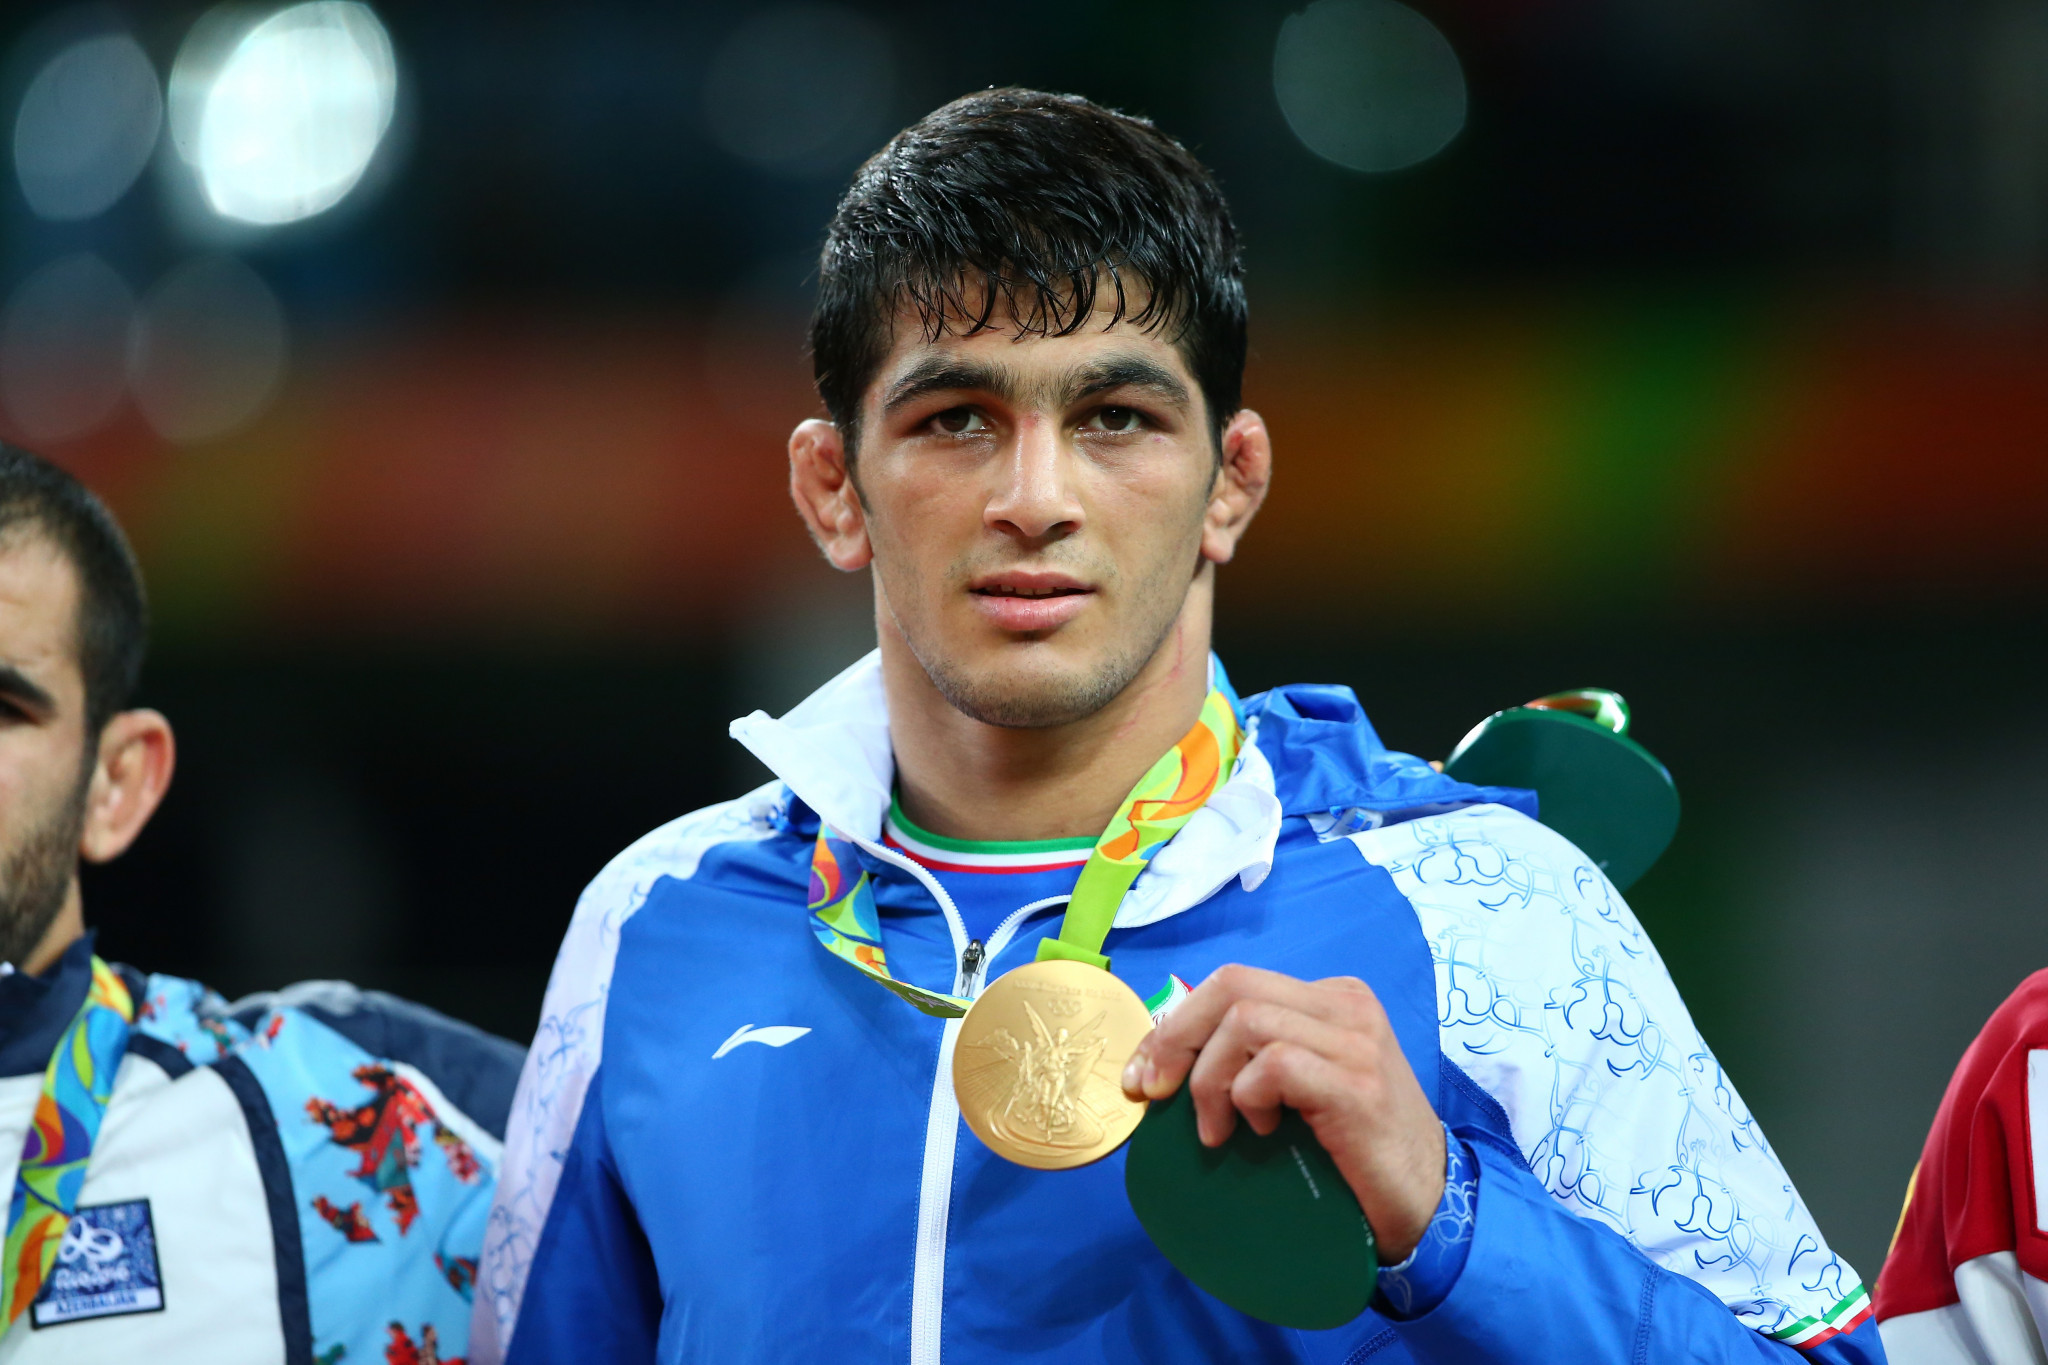 Olympic wrestling champion Hassan Yazdani revealed he is hoping to compete at the 2024 Olympic Games in Paris ©Getty Images